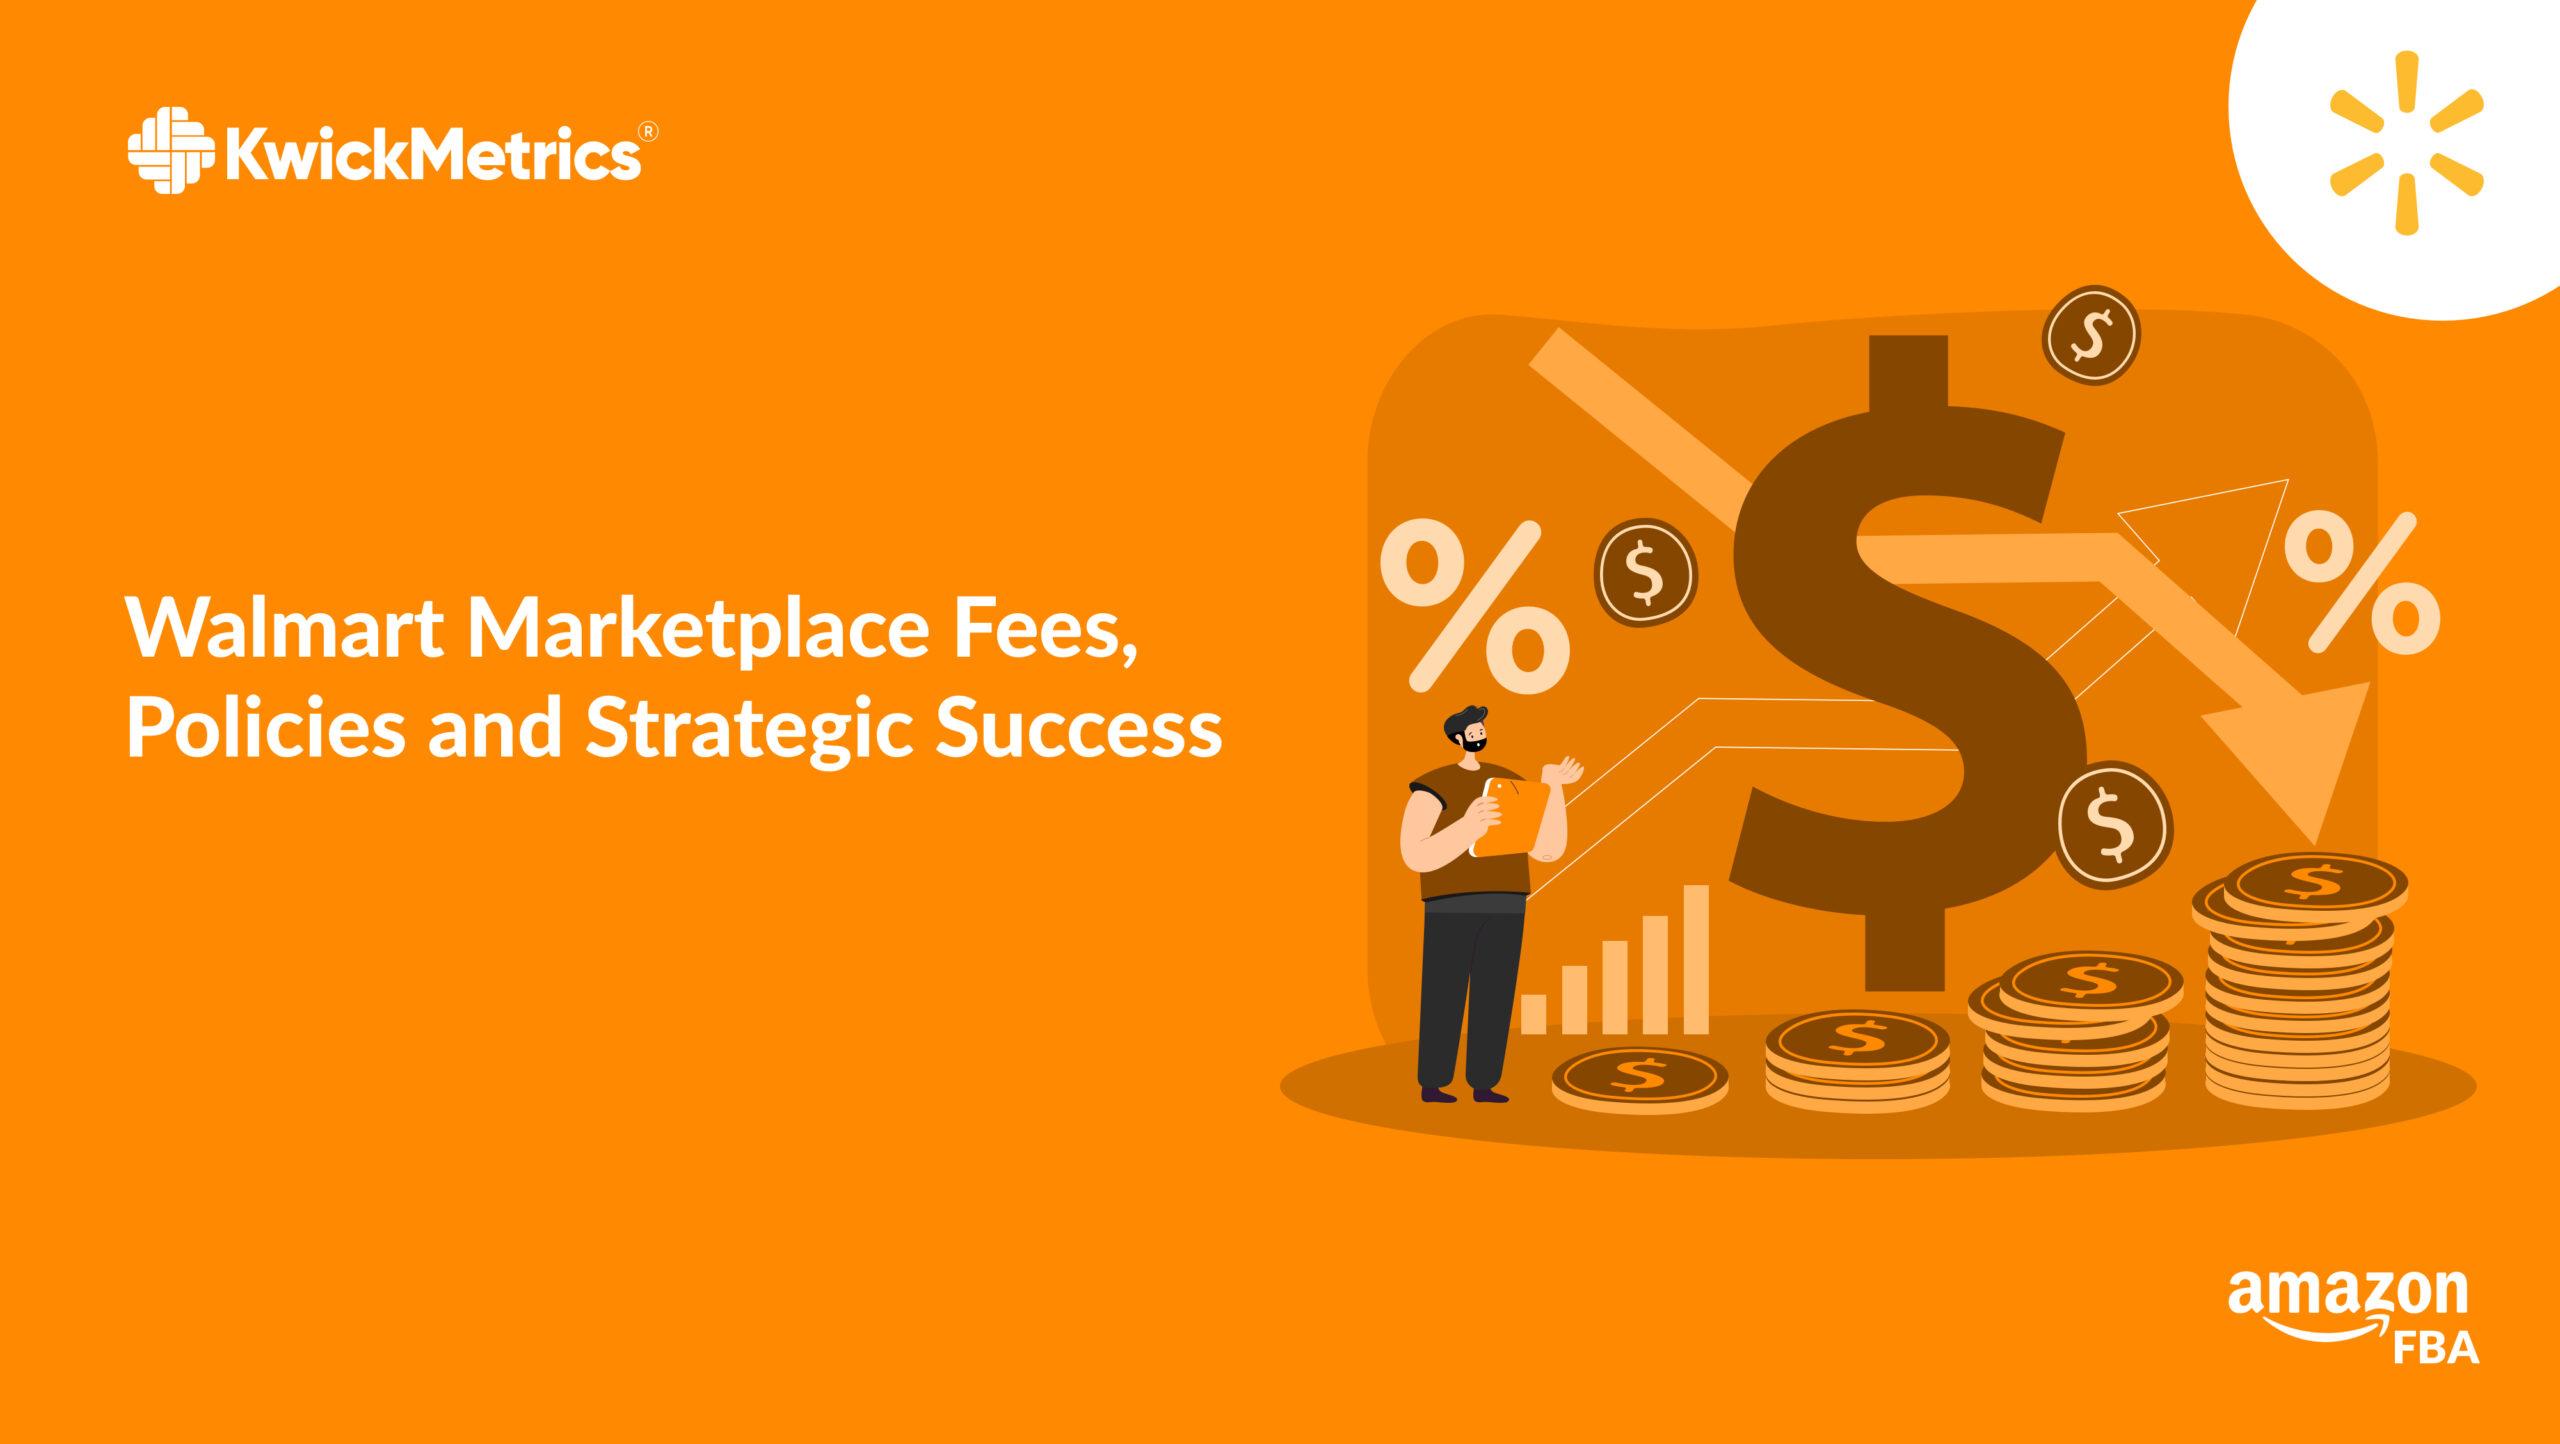 Walmart Marketplace Fees, Policies and Strategic Success